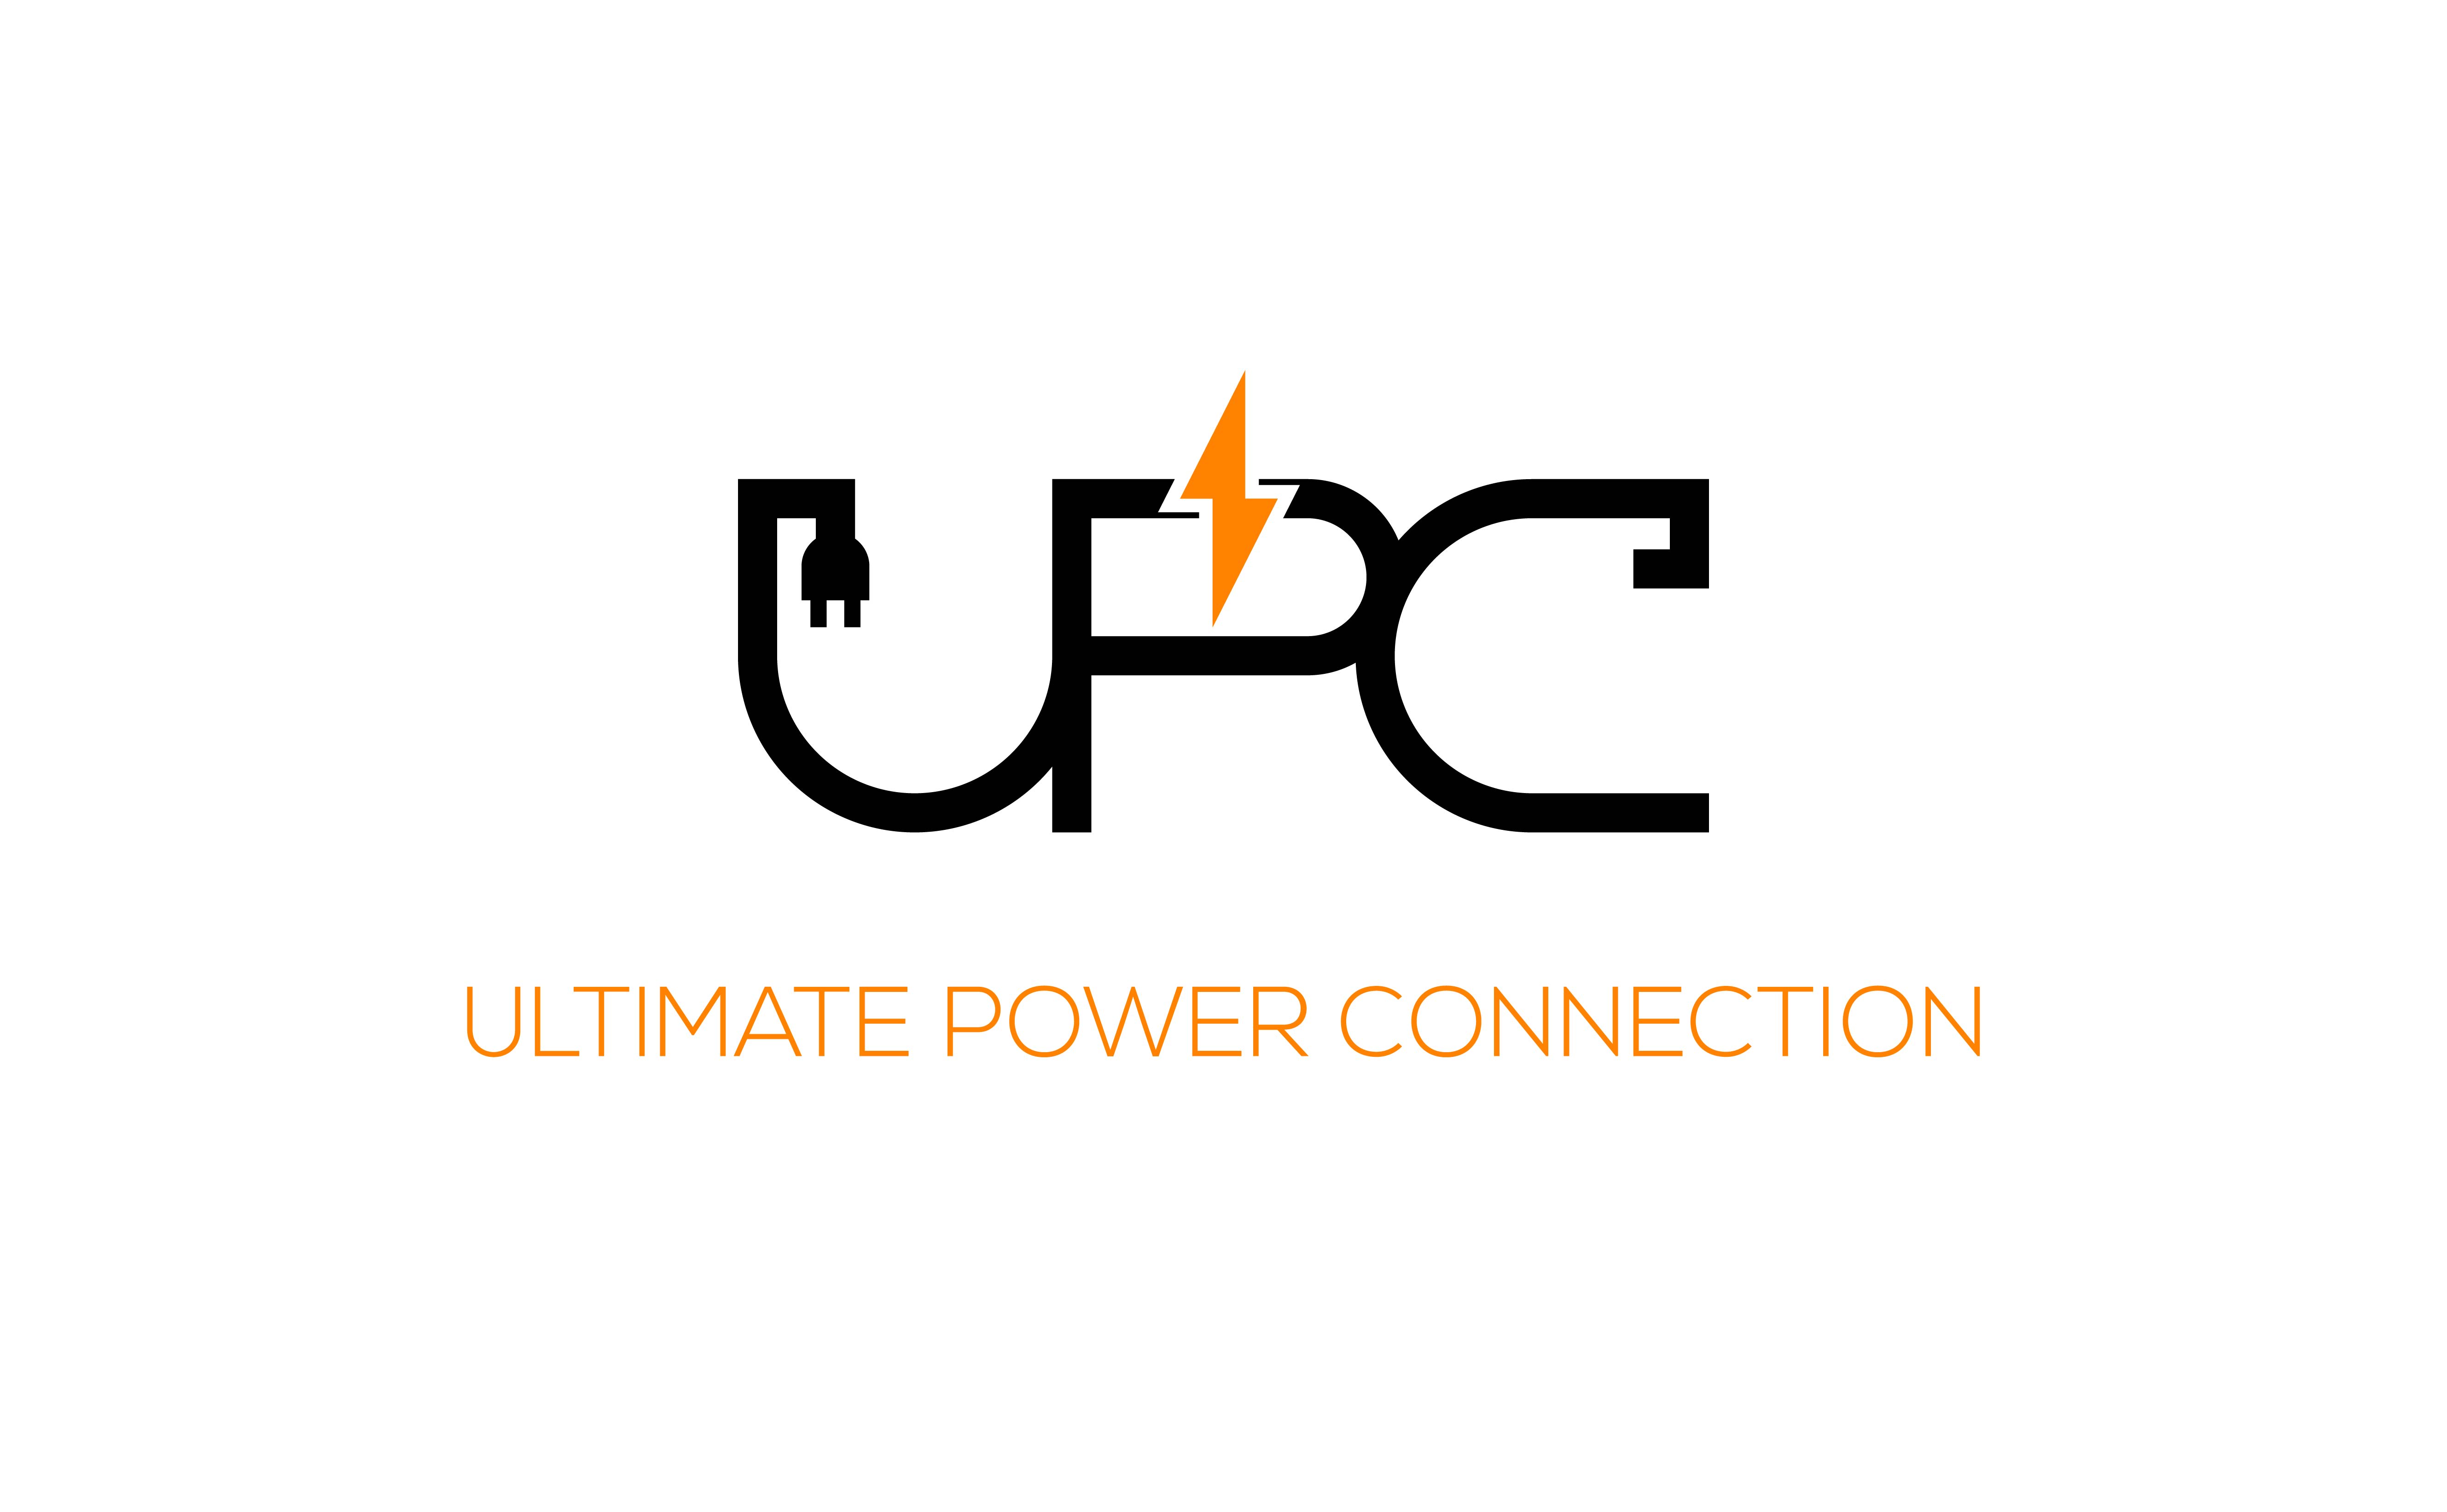 The Ultimate Power Connection